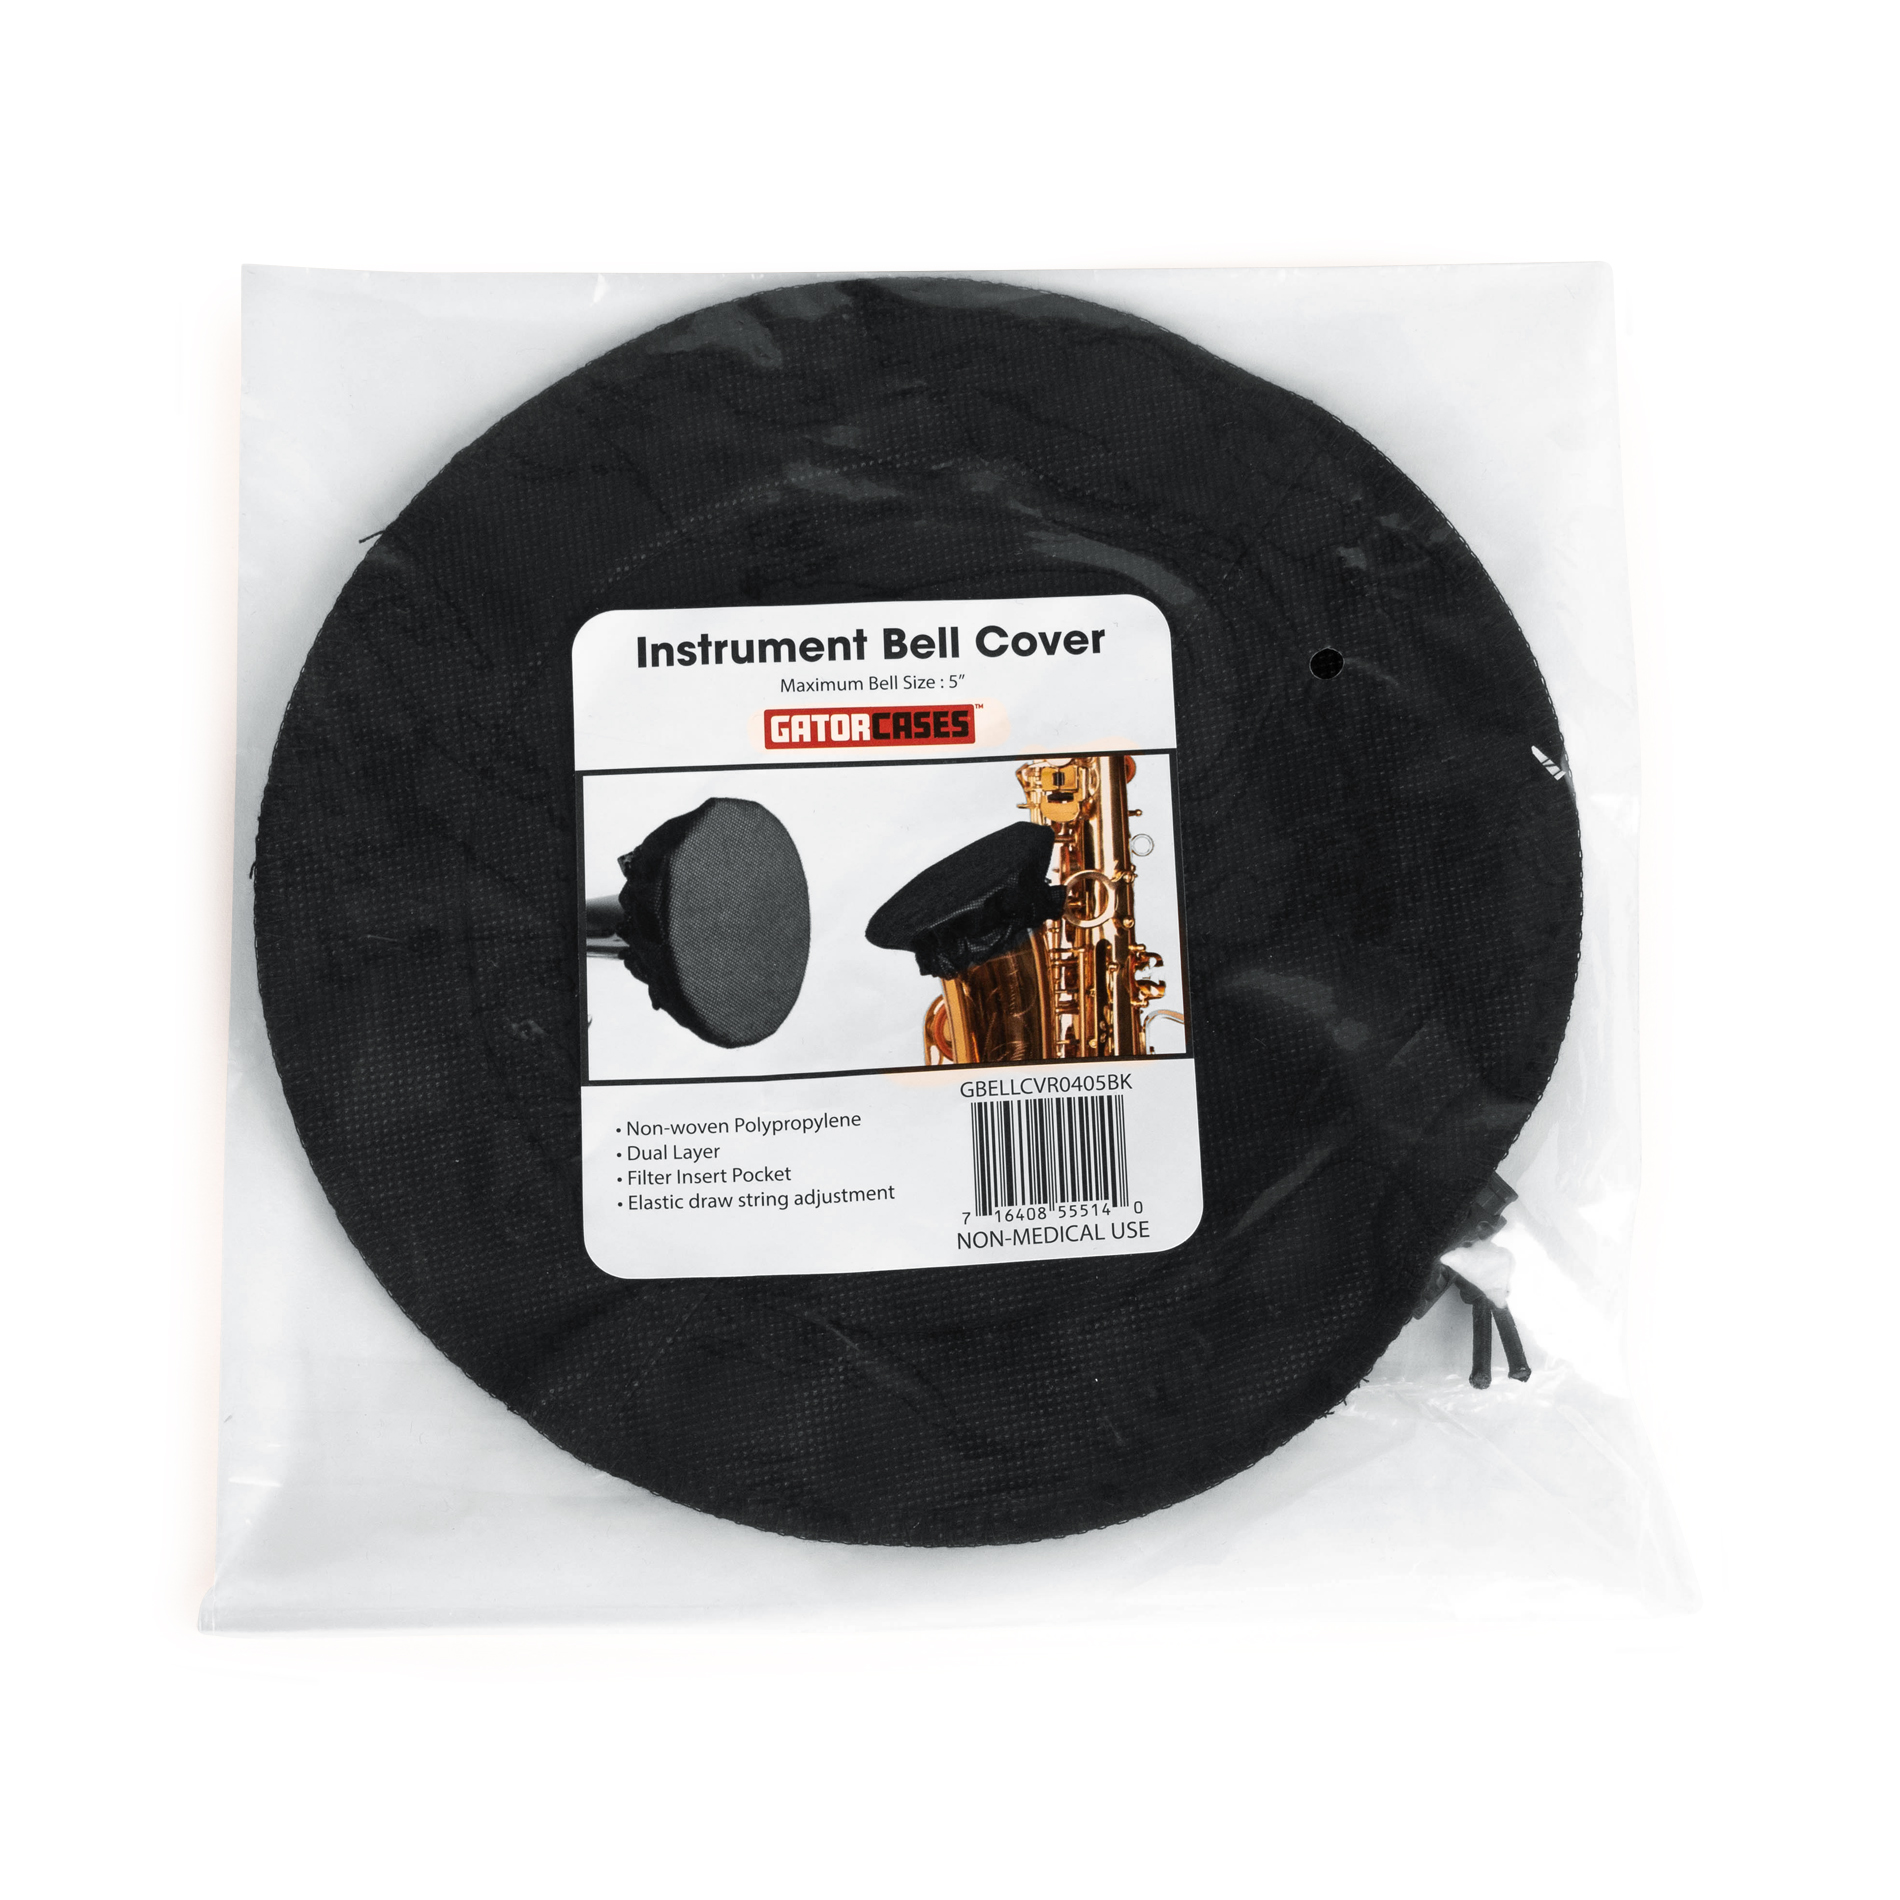 Black Bell Cover with MERV 13 filter, 30-32 Inches-GBELLCVR3032BK